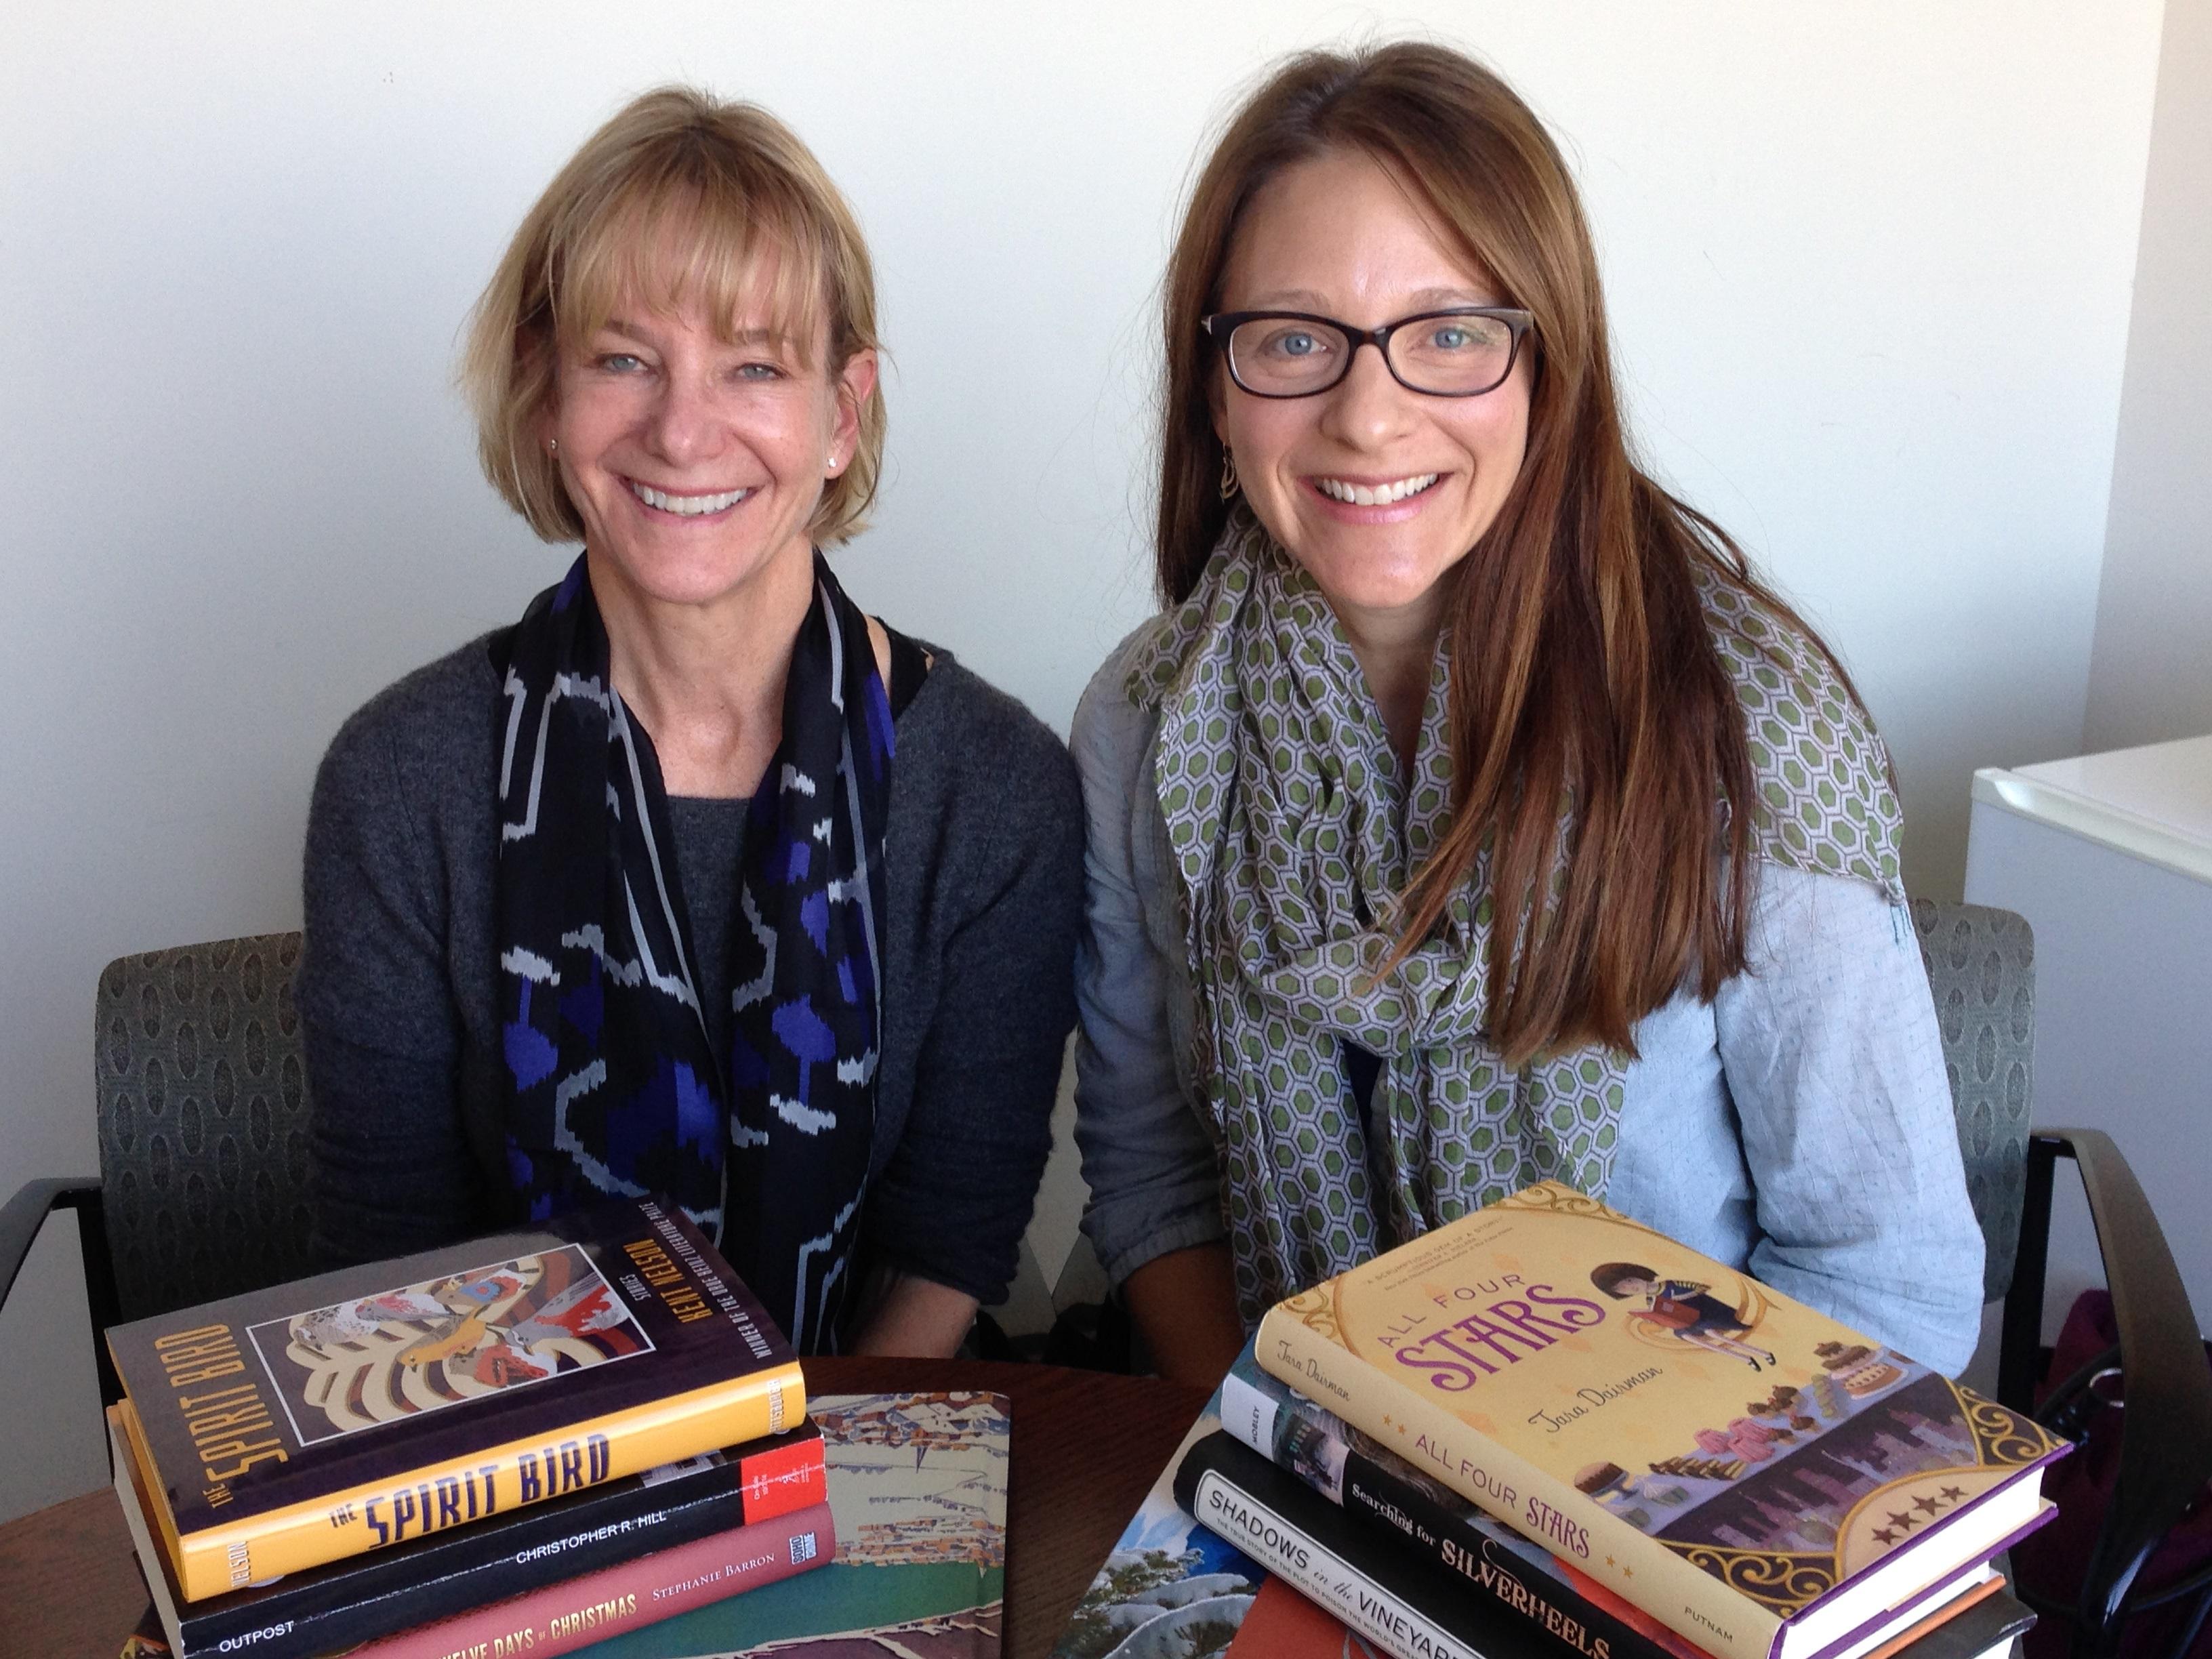 Cathy Langer and Nicole Magistro/Books